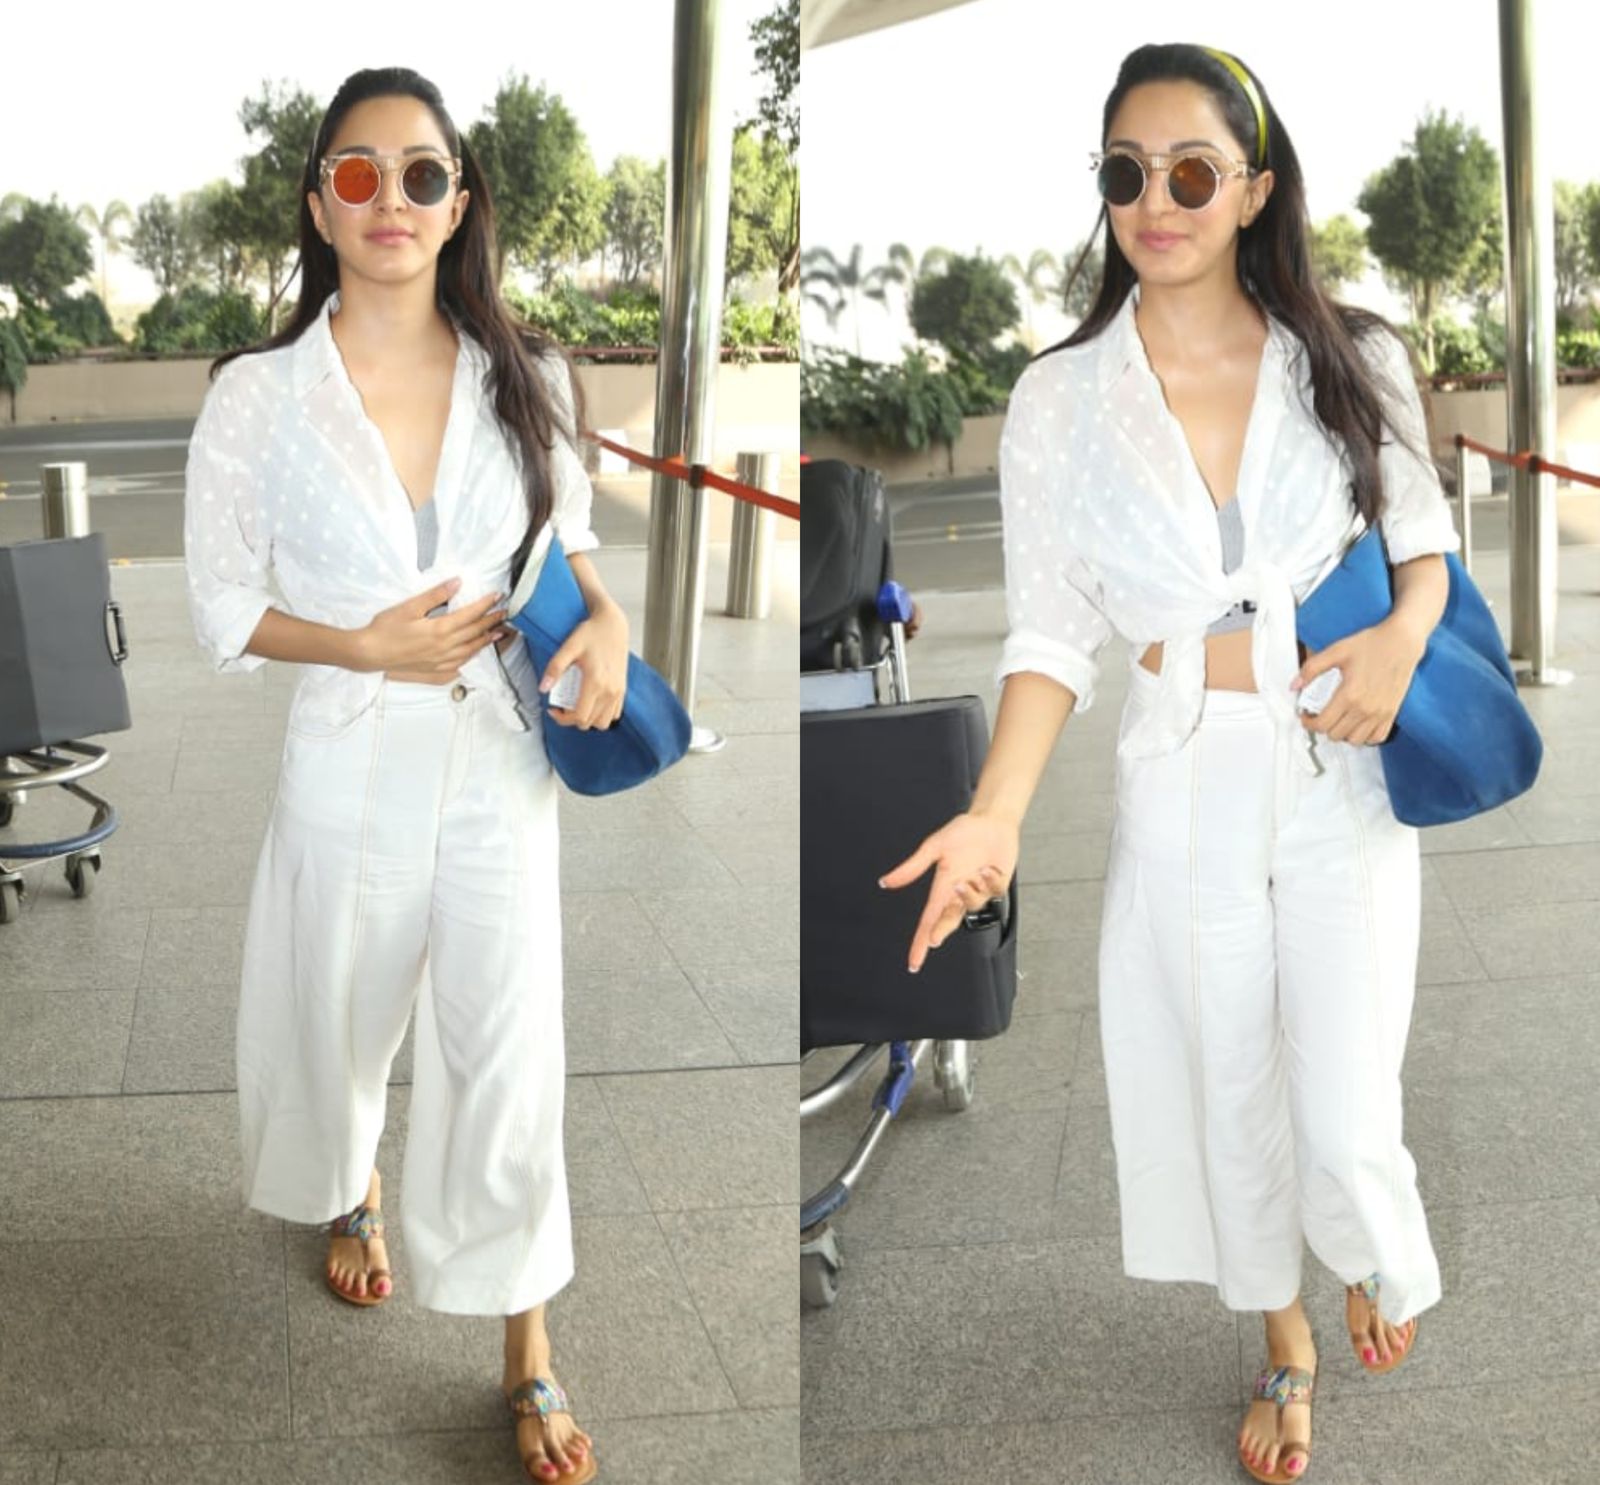 Kiara Advani Looks Gorgeous In A Boho Chic Outfit At The Airport; Get The Look